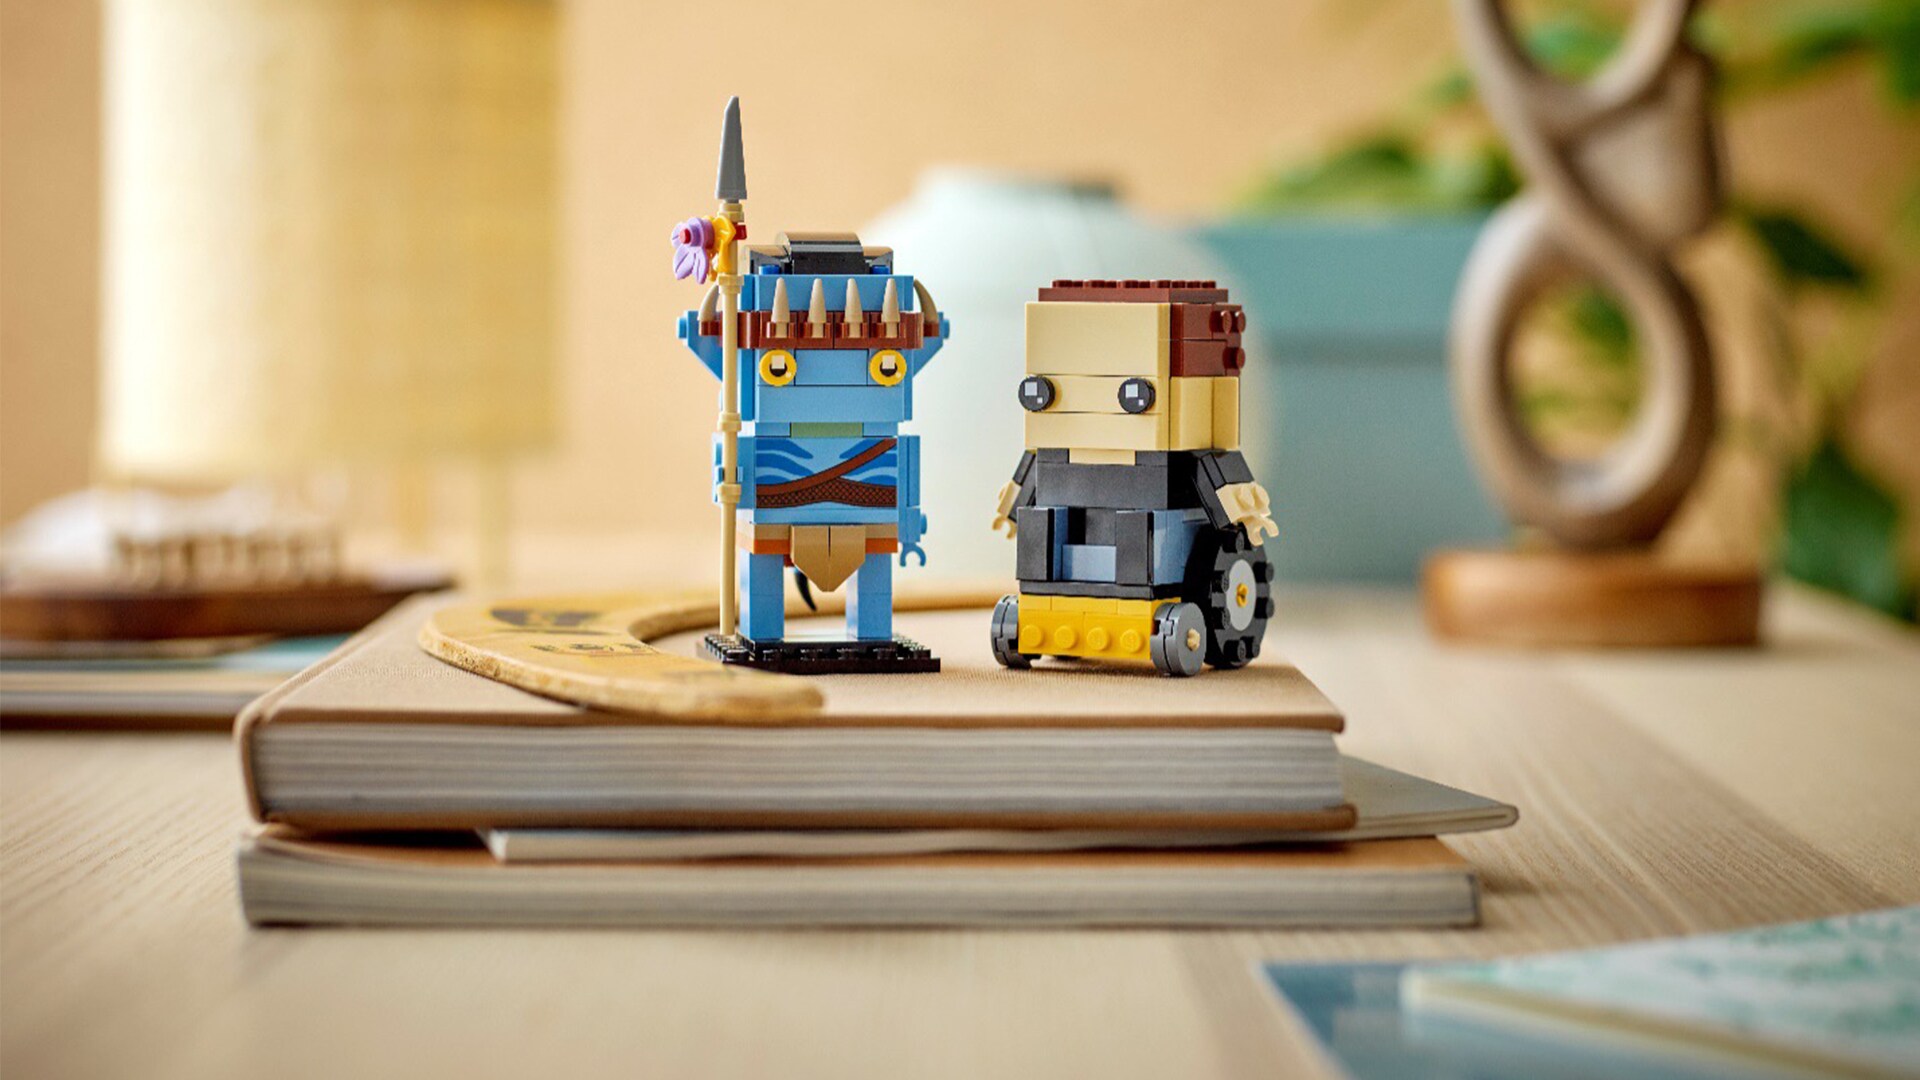 Image of LEGO Avatar Jake Sully & his Avatar set on the desk with the books and notepads